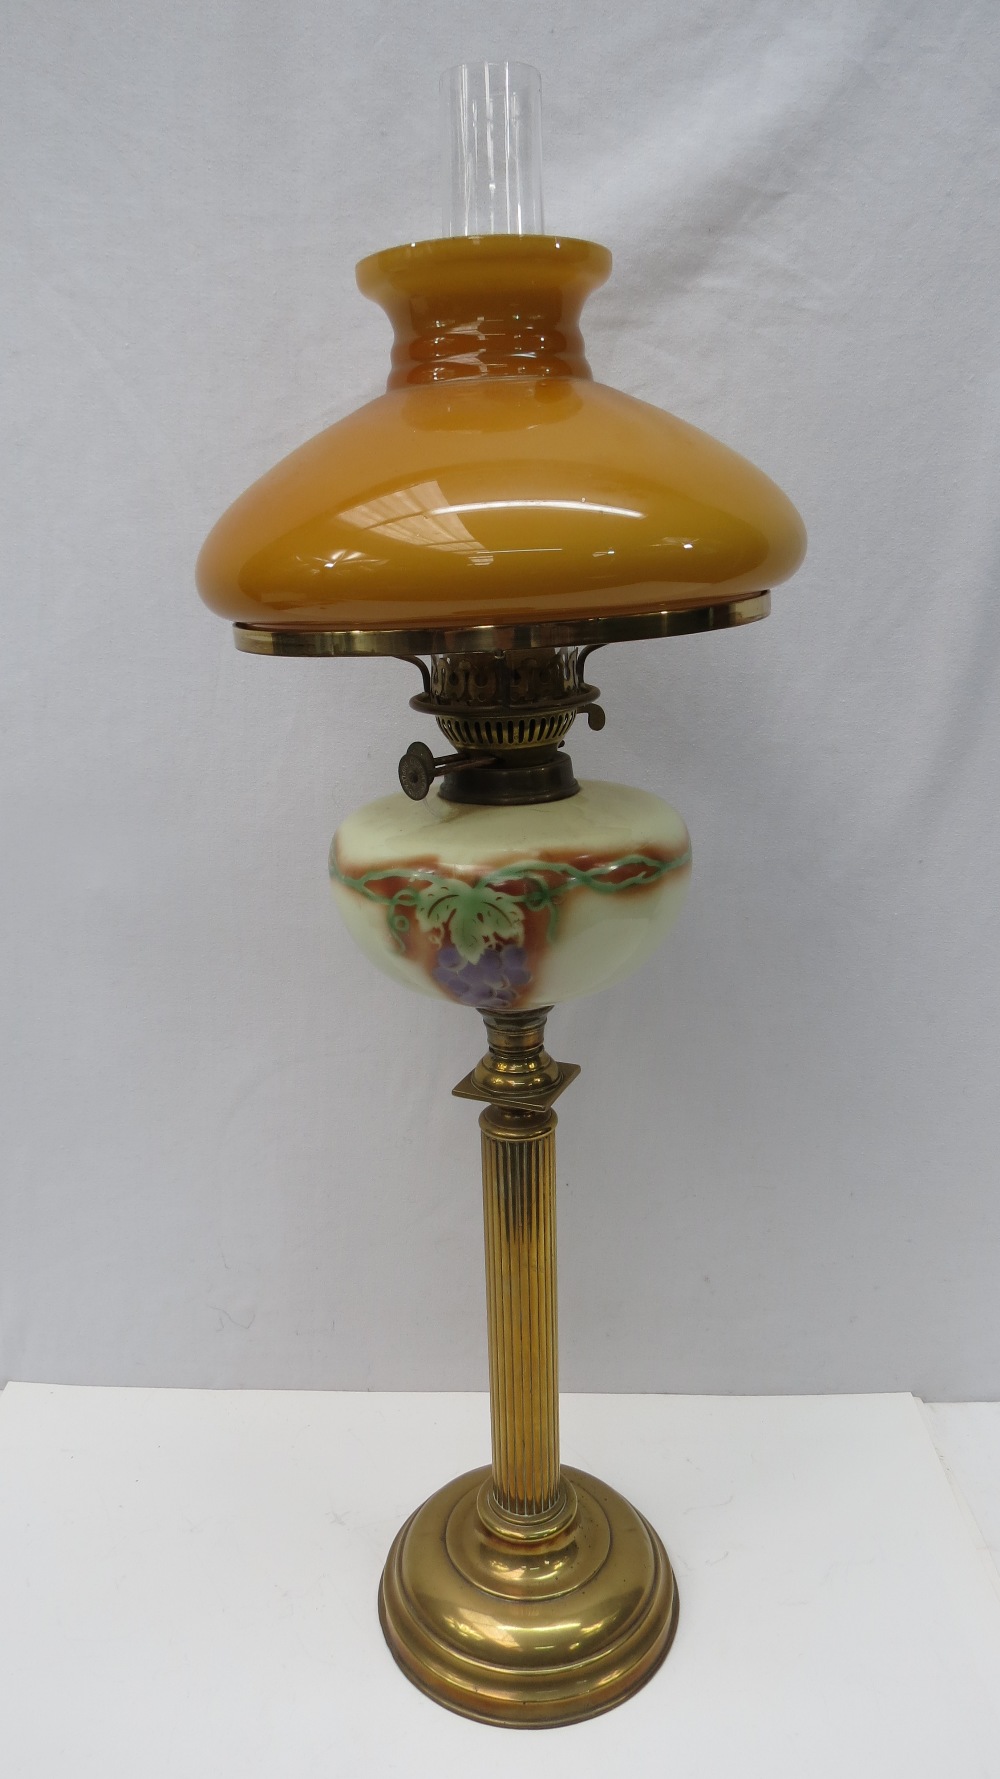 A fine quality early 20thC oil lamp complete with chimney, shade and reservoir. Brass fittings all